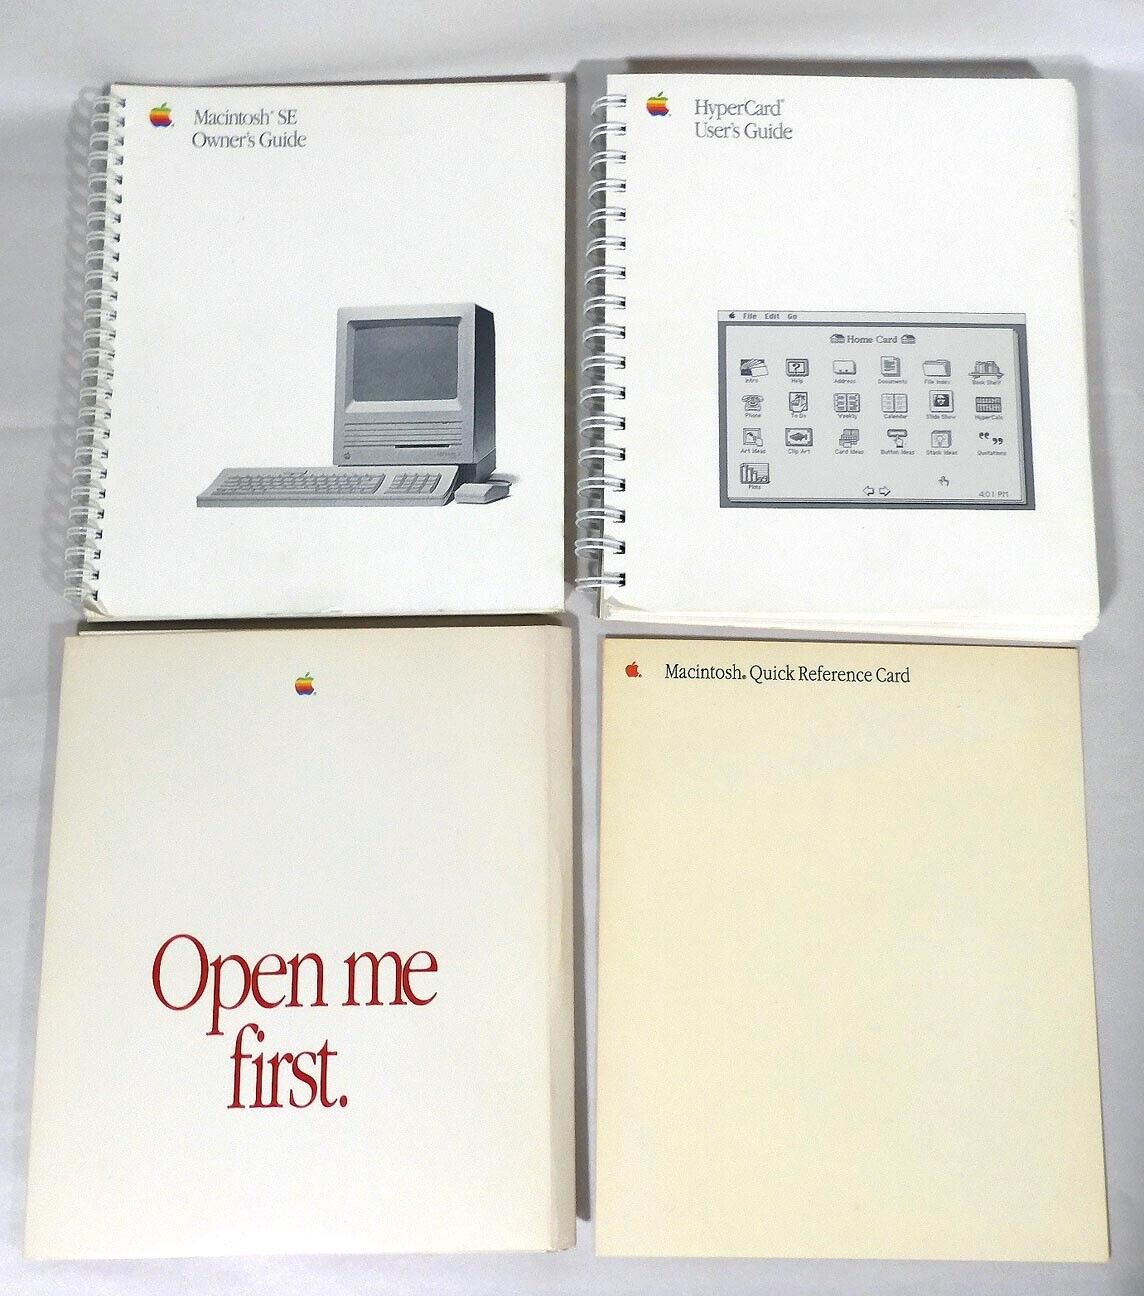 Apple Macintosh SE Owners Guide~HyperCard Guide~Open Me First Packet & More